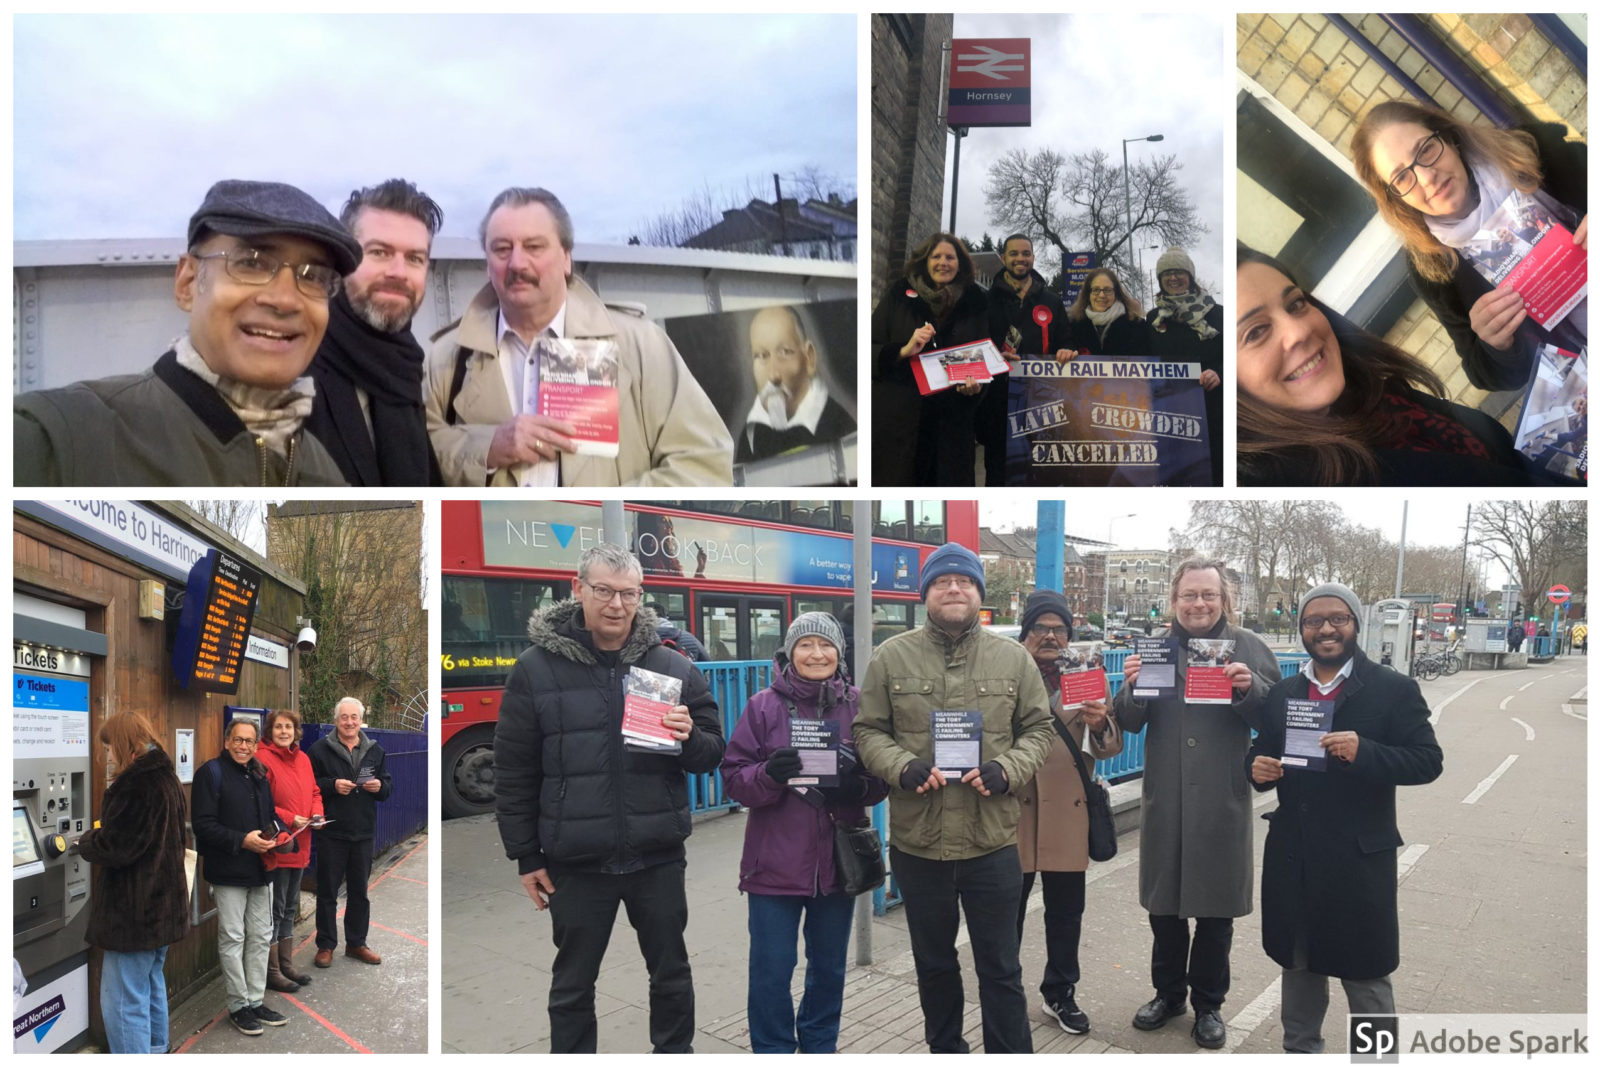 Campaigners leafletting stations in Haringey about rising rail fares